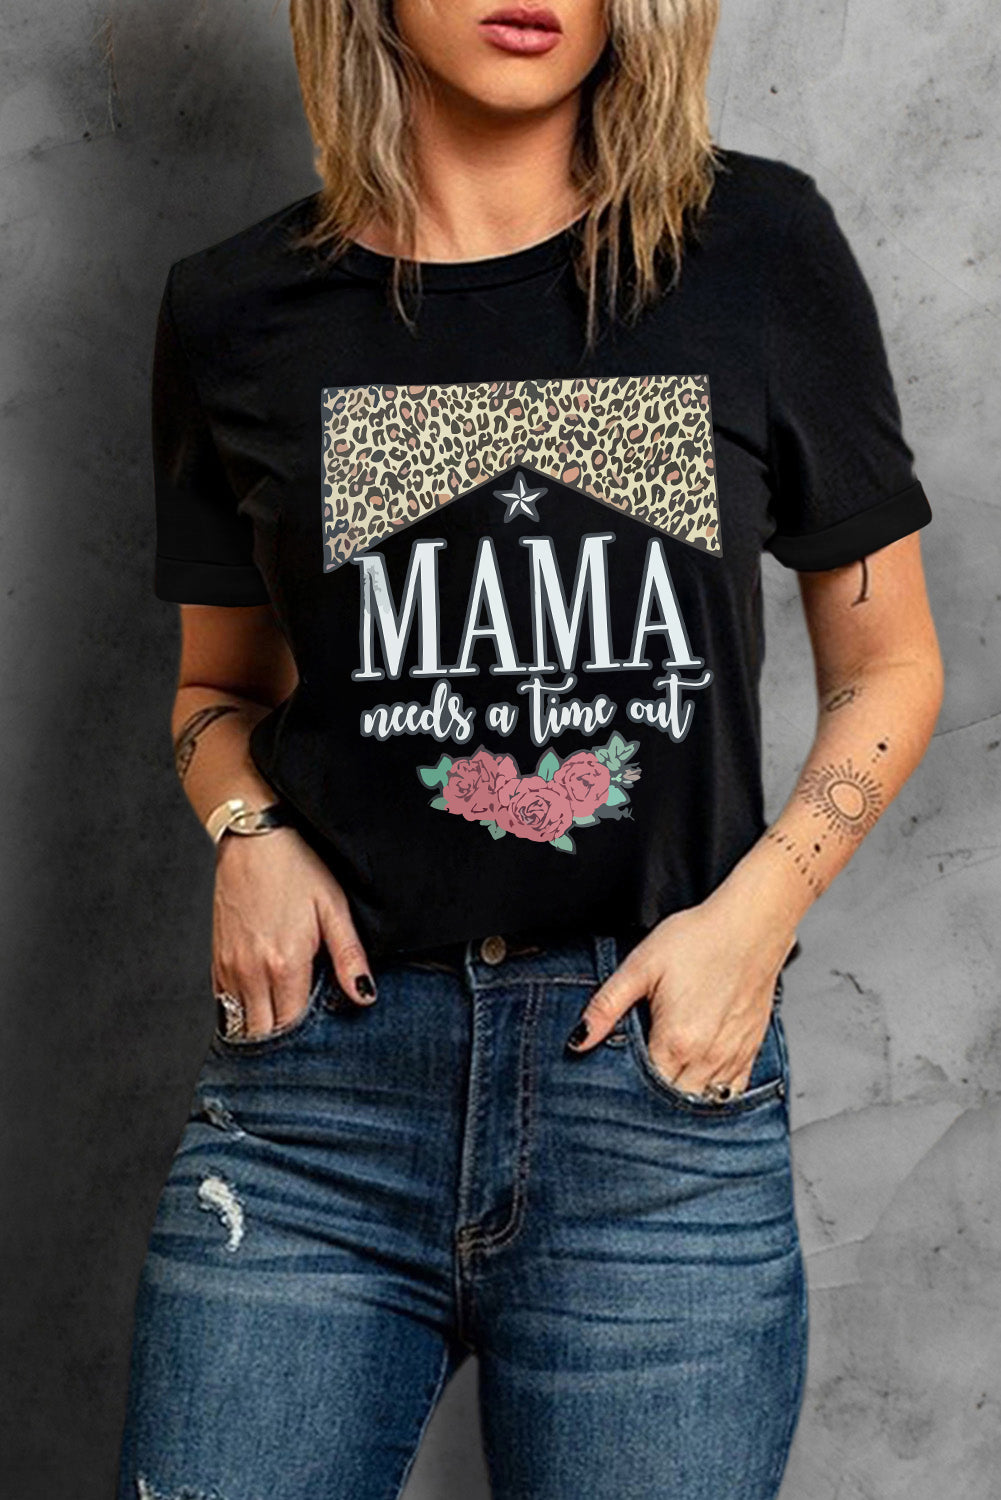 MAMA NEEDS A TIME OUT Graphic Tee - ONLINE ONLY 2-10 DAY SHIPPING